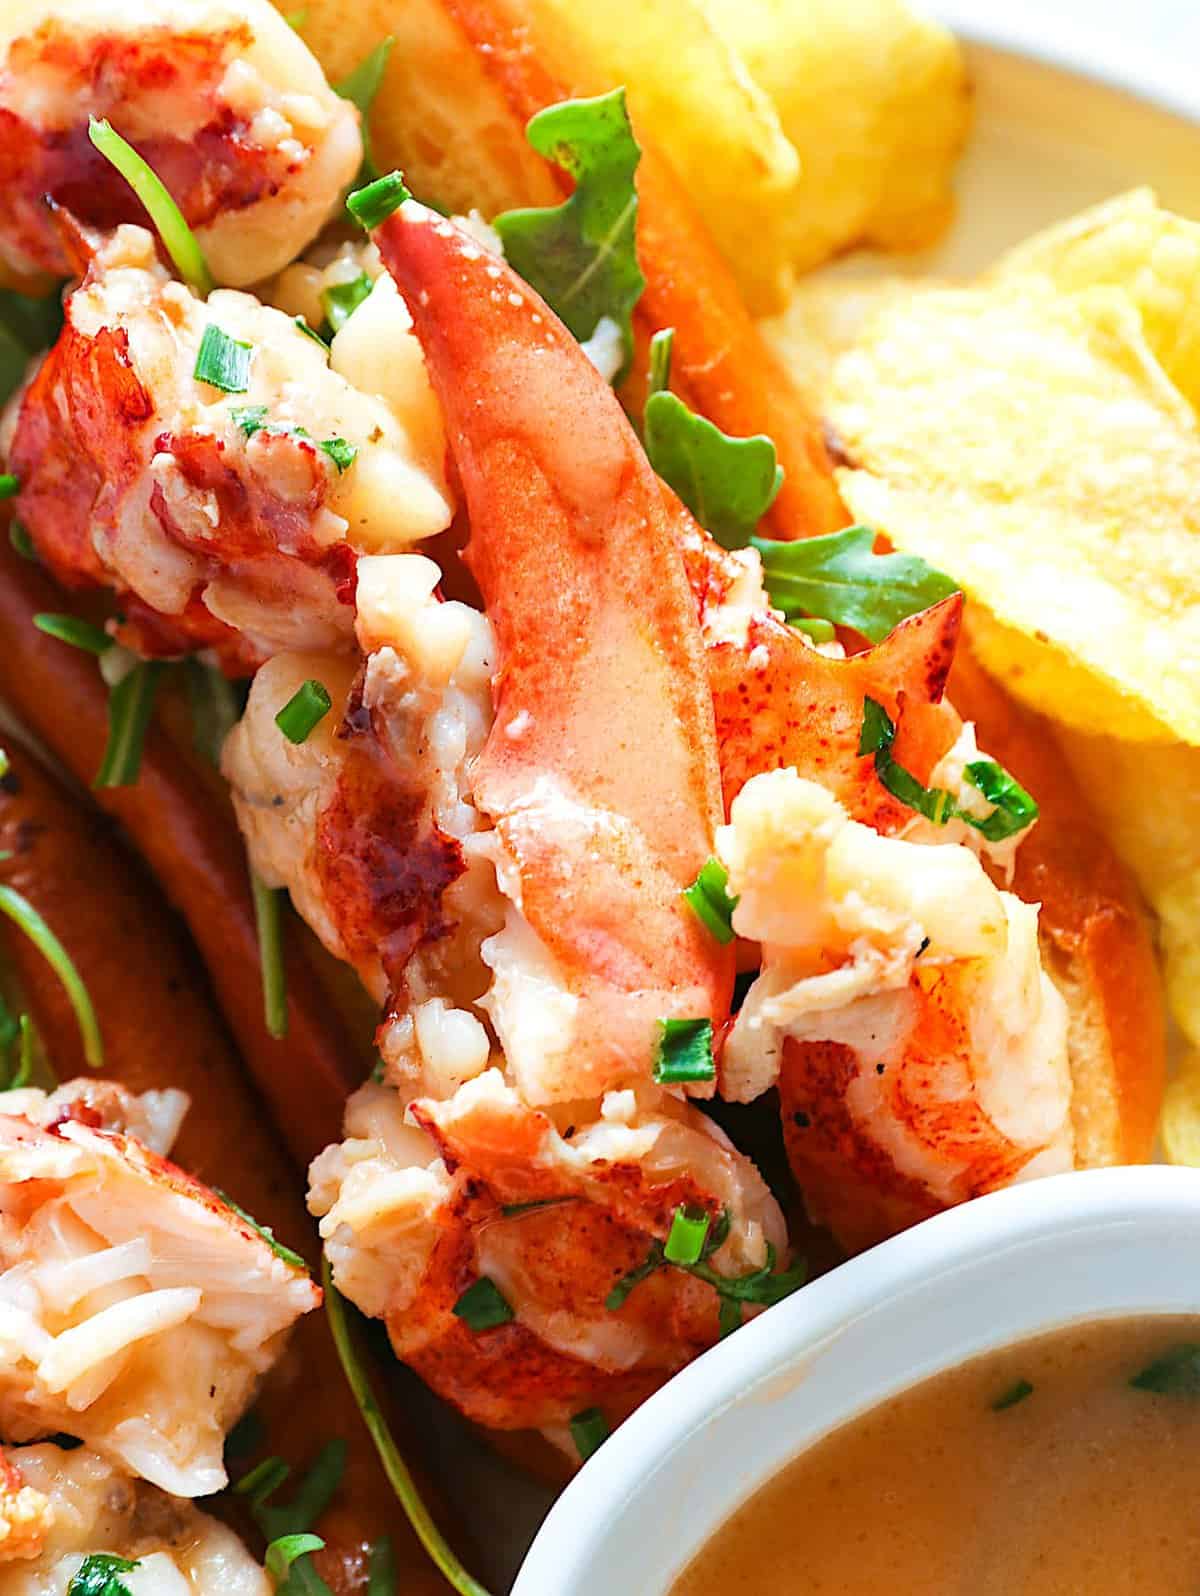 A mouthwatering closeup on a Connecticut Lobster Roll with a side of potato chips and herbed butter